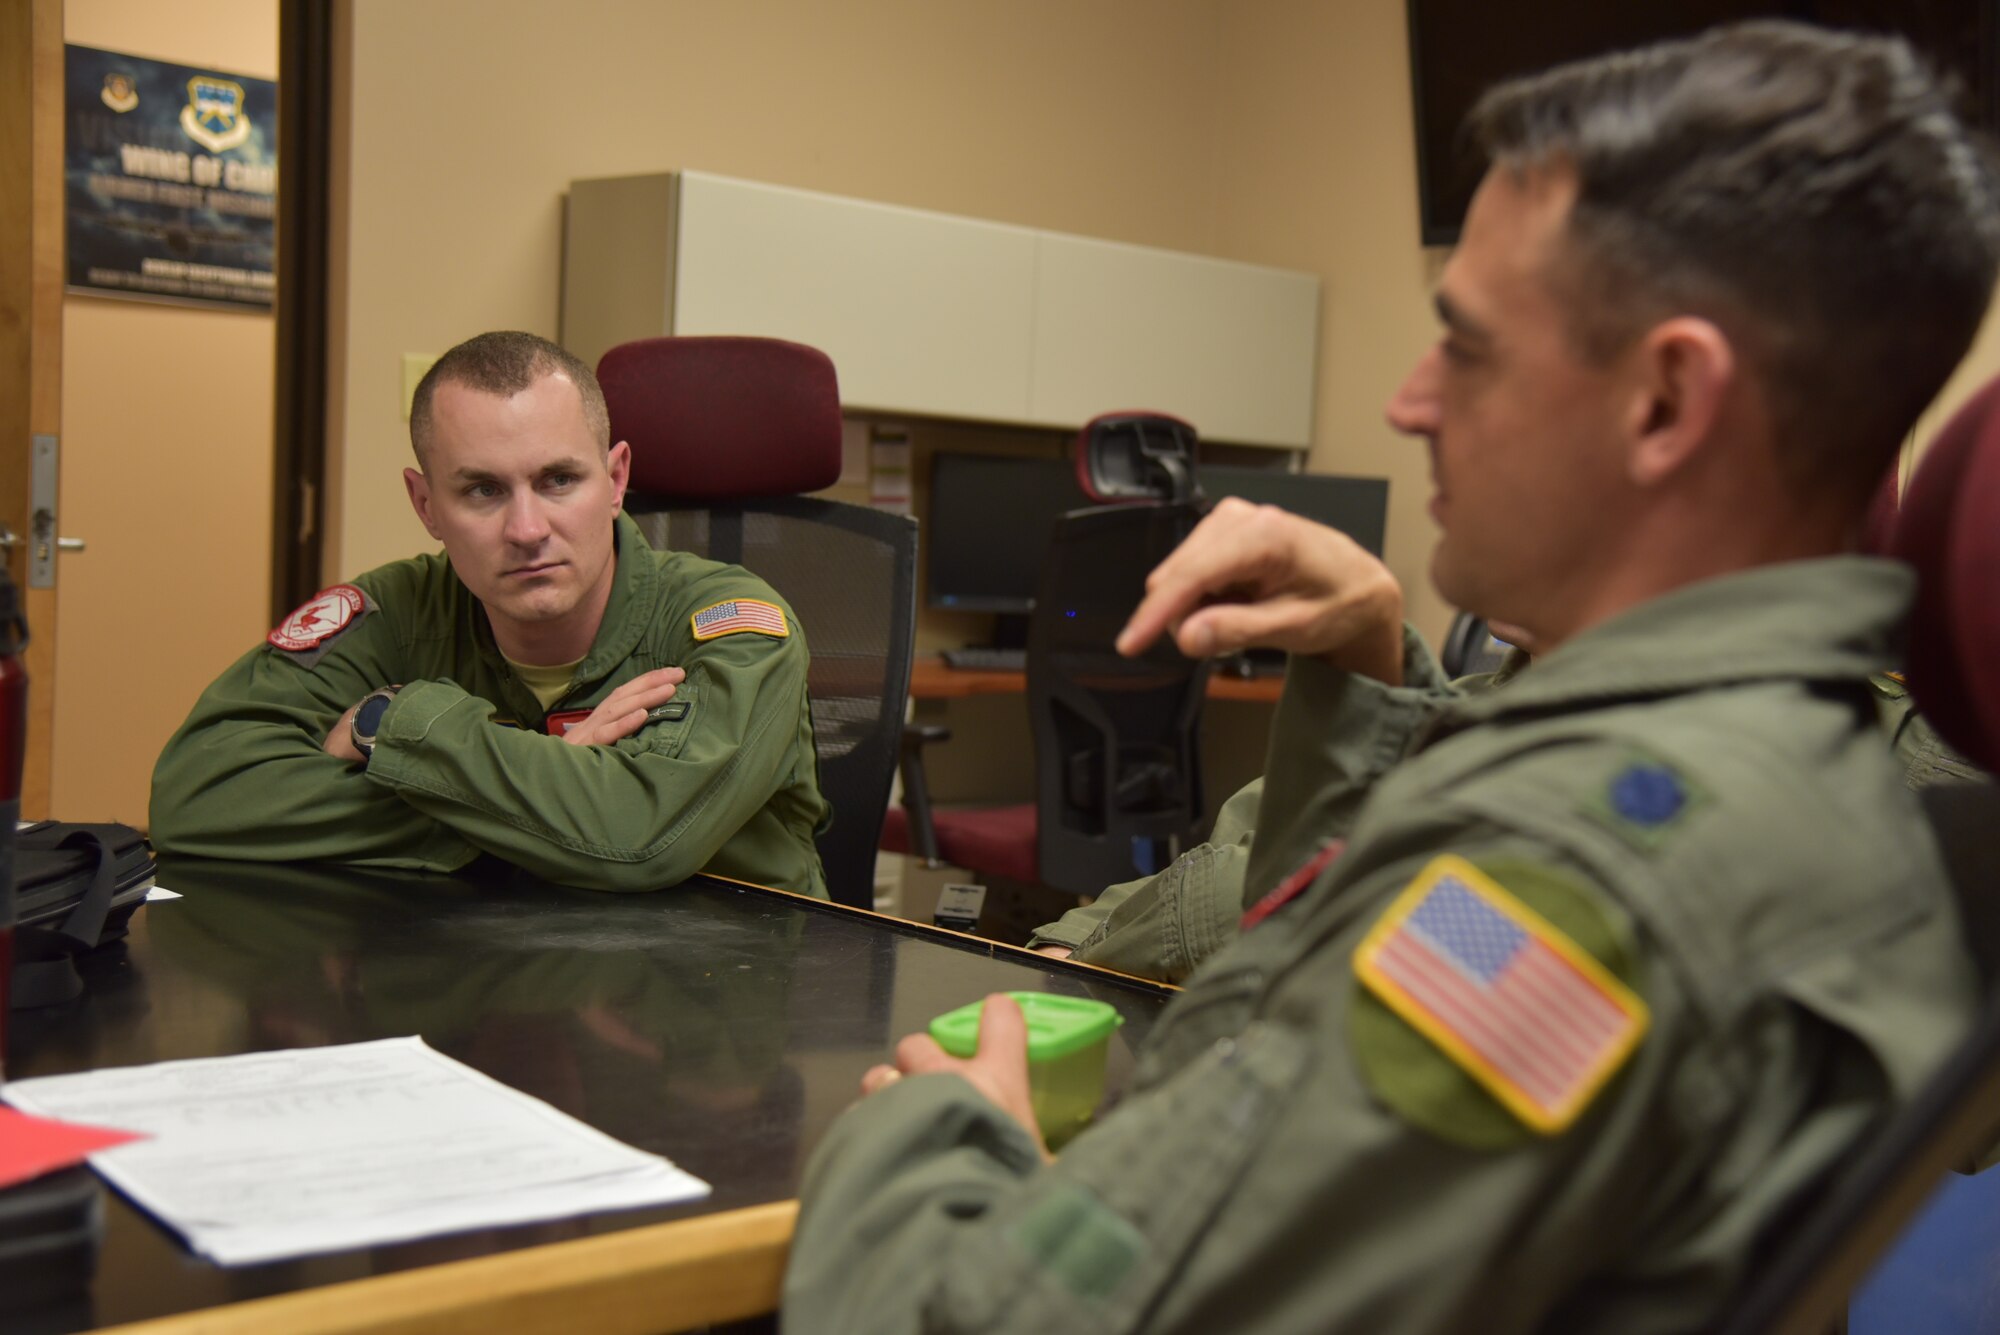 Senior Airman John Boudreaux (left), 815th Airlift Squadron loadmaster, listens to Lt. Col. Stuart Rubio (right), 815th AS commander and pilot, during a post-mission briefing April 18, 2019, Keesler Air Force Base, Mississippi. Boudreaux suffered three fractured vertebra in a car wreck. After receiving surgery and completing physical therapy, he attended loadmaster school for a second time and is in the process of completing his training to become a fully qualified loadmaster.  (U.S. Air Force photo by Tech Sgt. Michael Farrar)